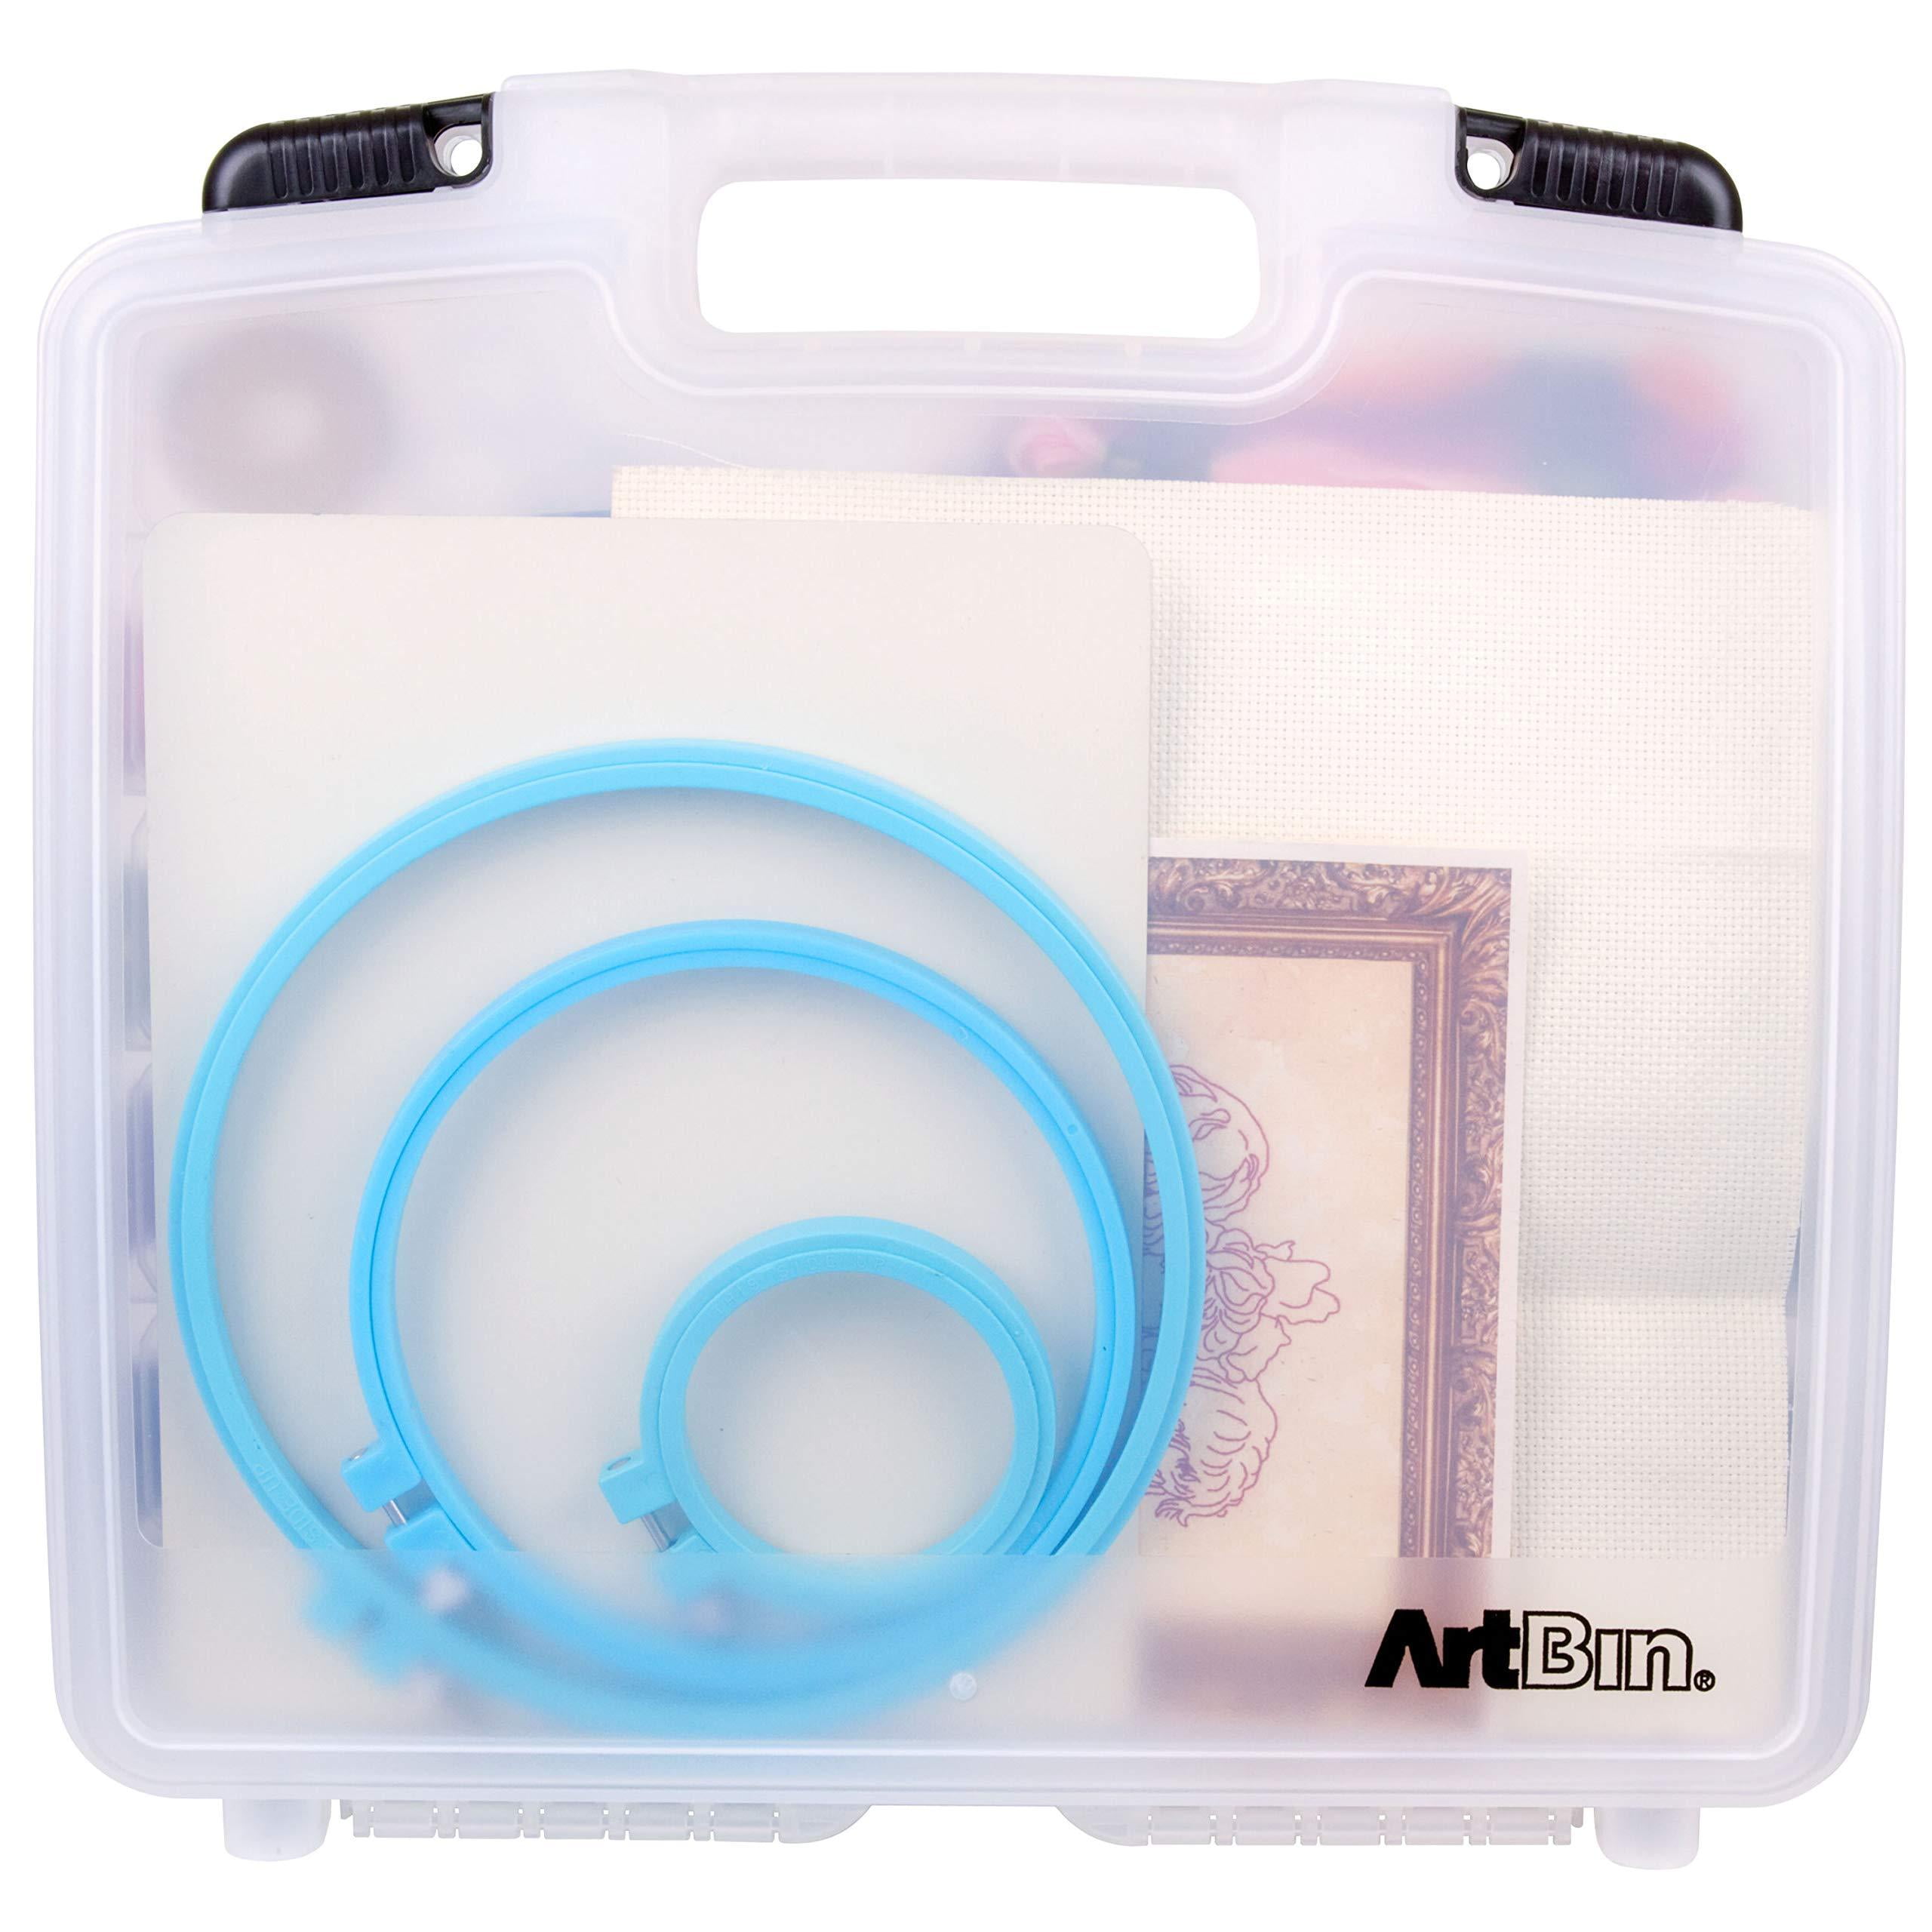 ArtBin Quick View Divided Deep Base with Lift Carrying Case Translucent Clear